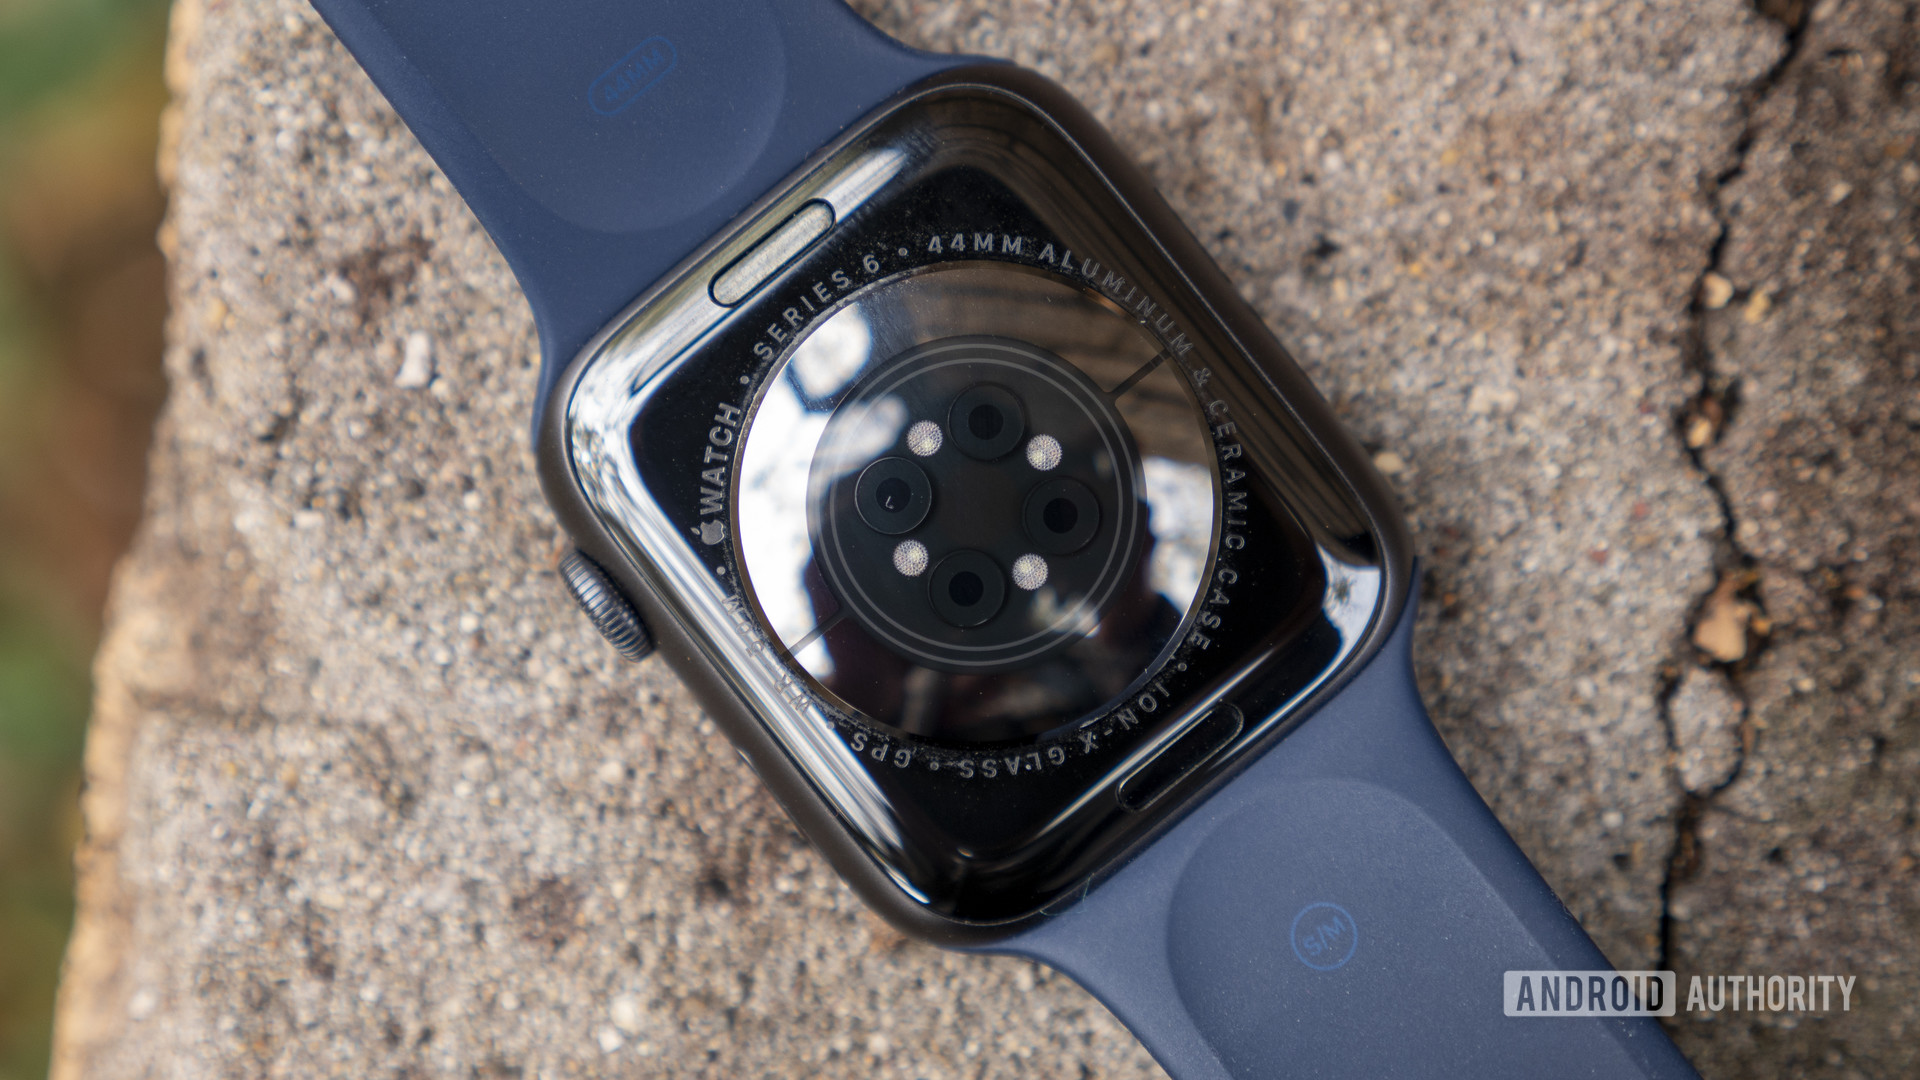 An Apple Watch Series 6 rests face down on a stone outdoors, displaying the sensors on the back of the device.